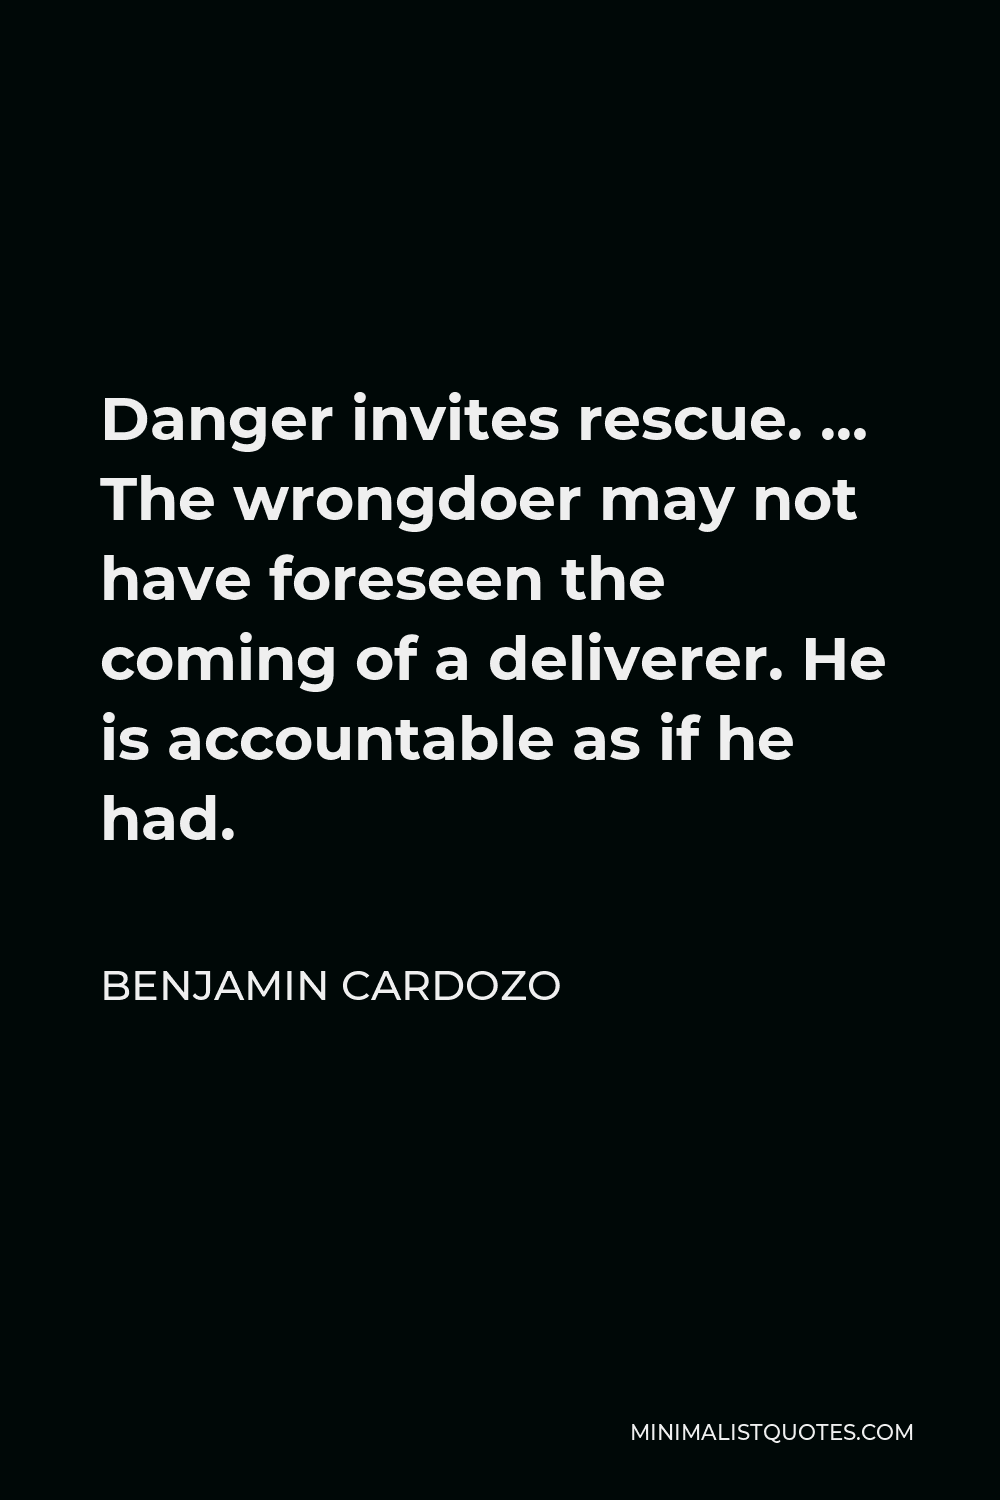 Benjamin Cardozo Quote - Danger invites rescue. … The wrongdoer may not have foreseen the coming of a deliverer. He is accountable as if he had.